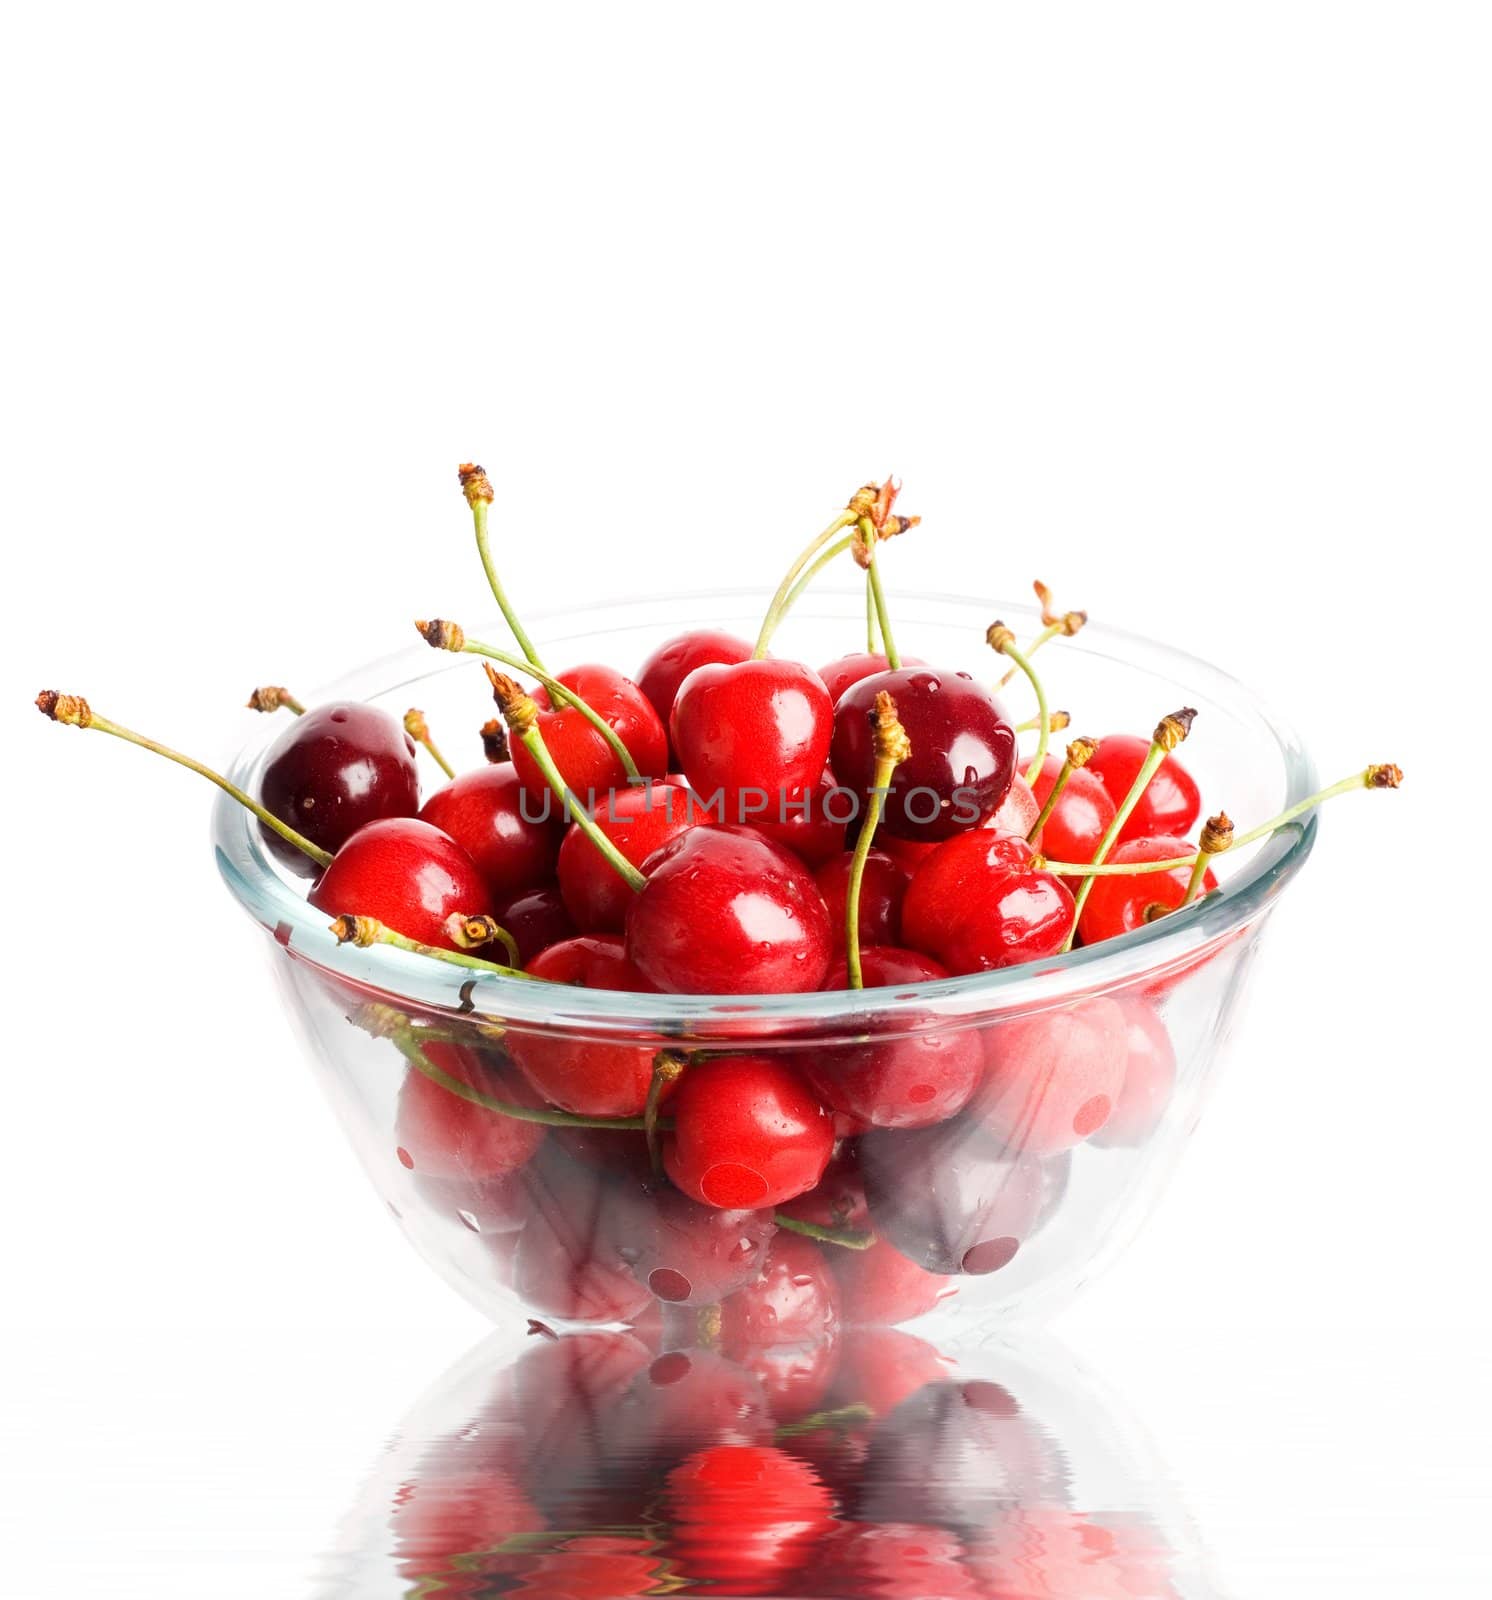 An image of ripe red cherries in a glass cup